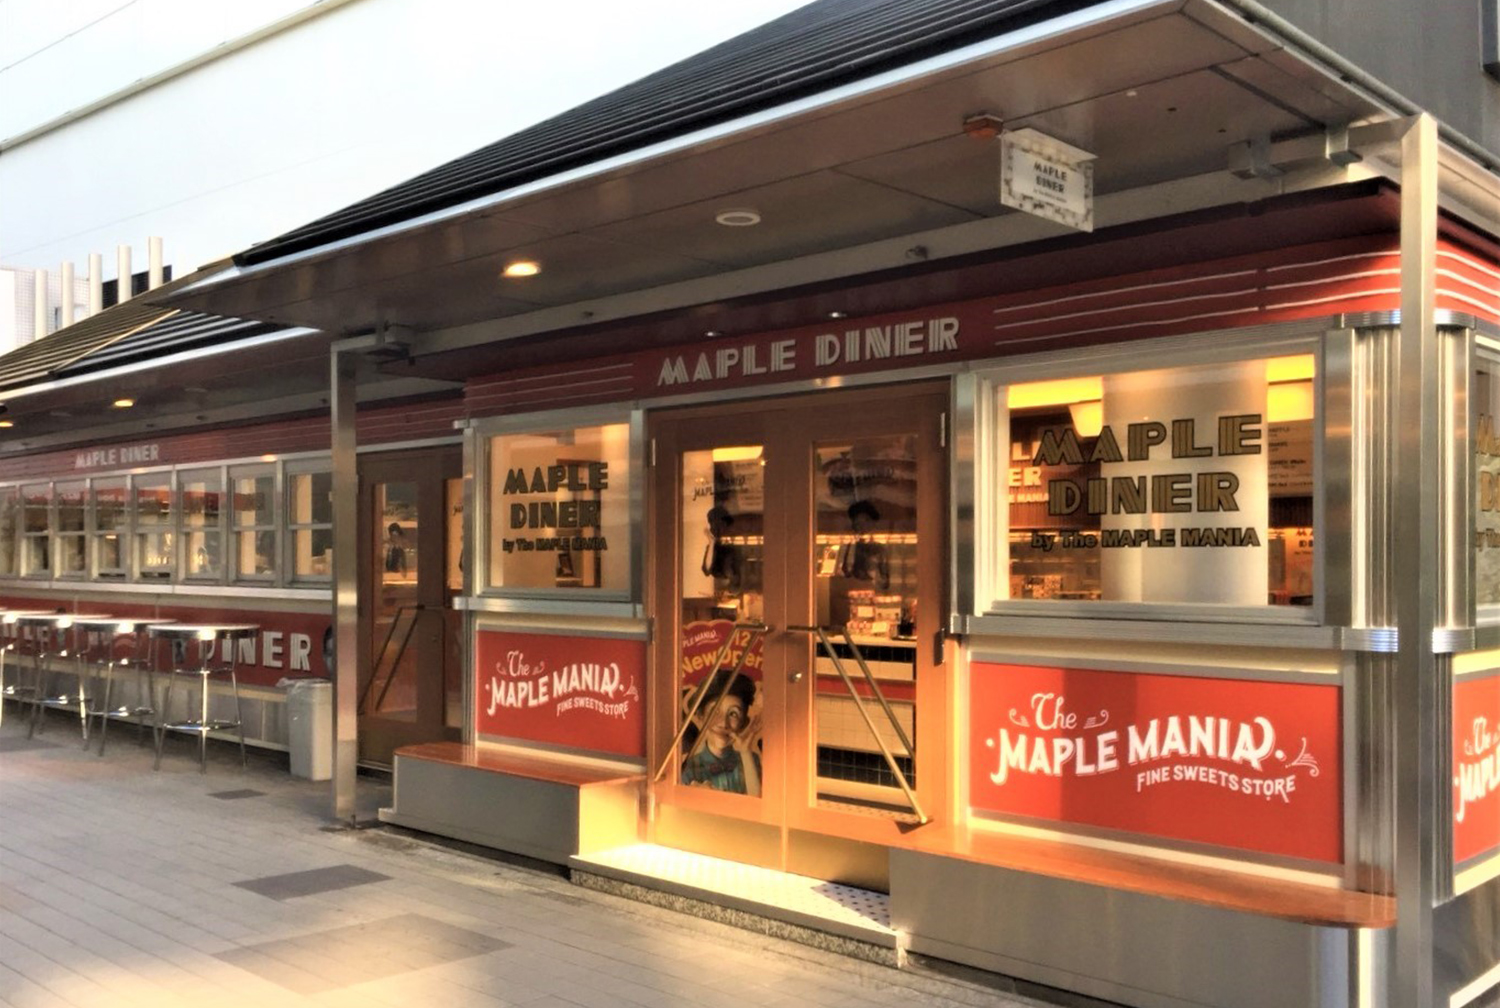 MAPLE DINER by The MAPLE MANIA